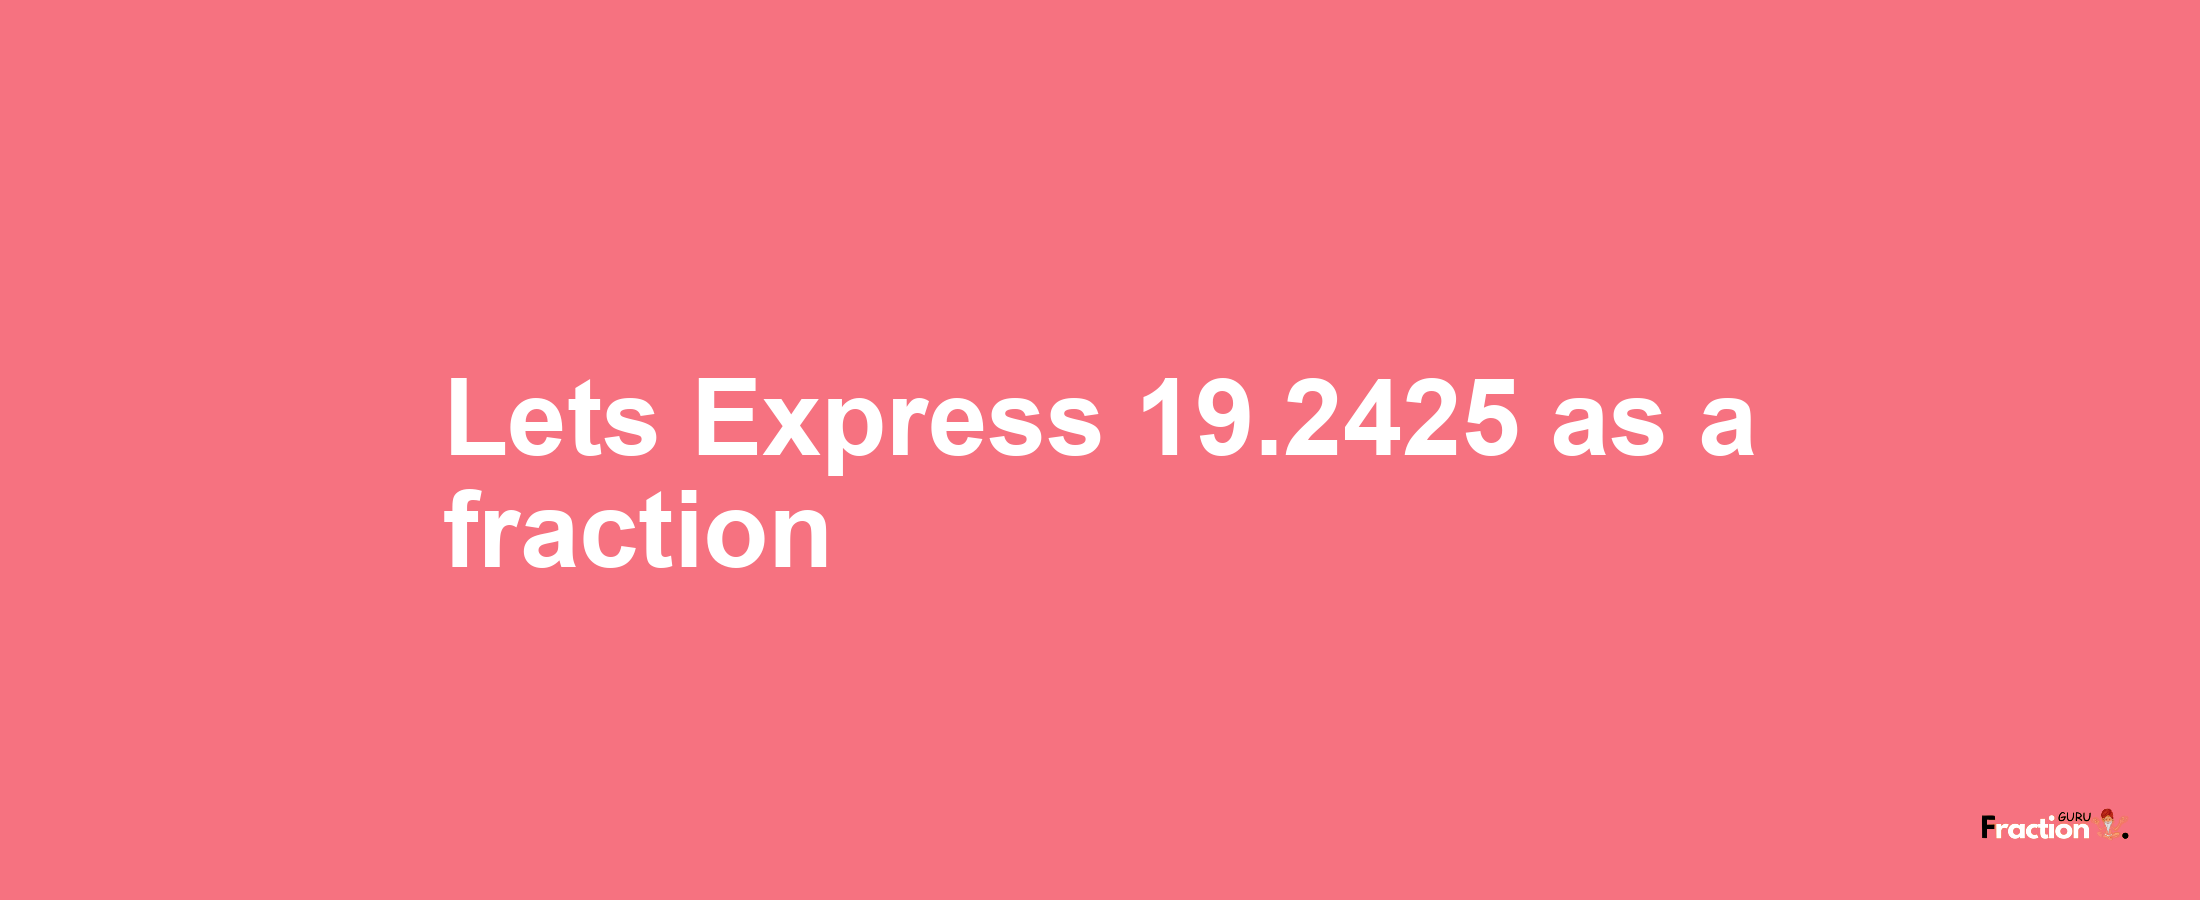 Lets Express 19.2425 as afraction